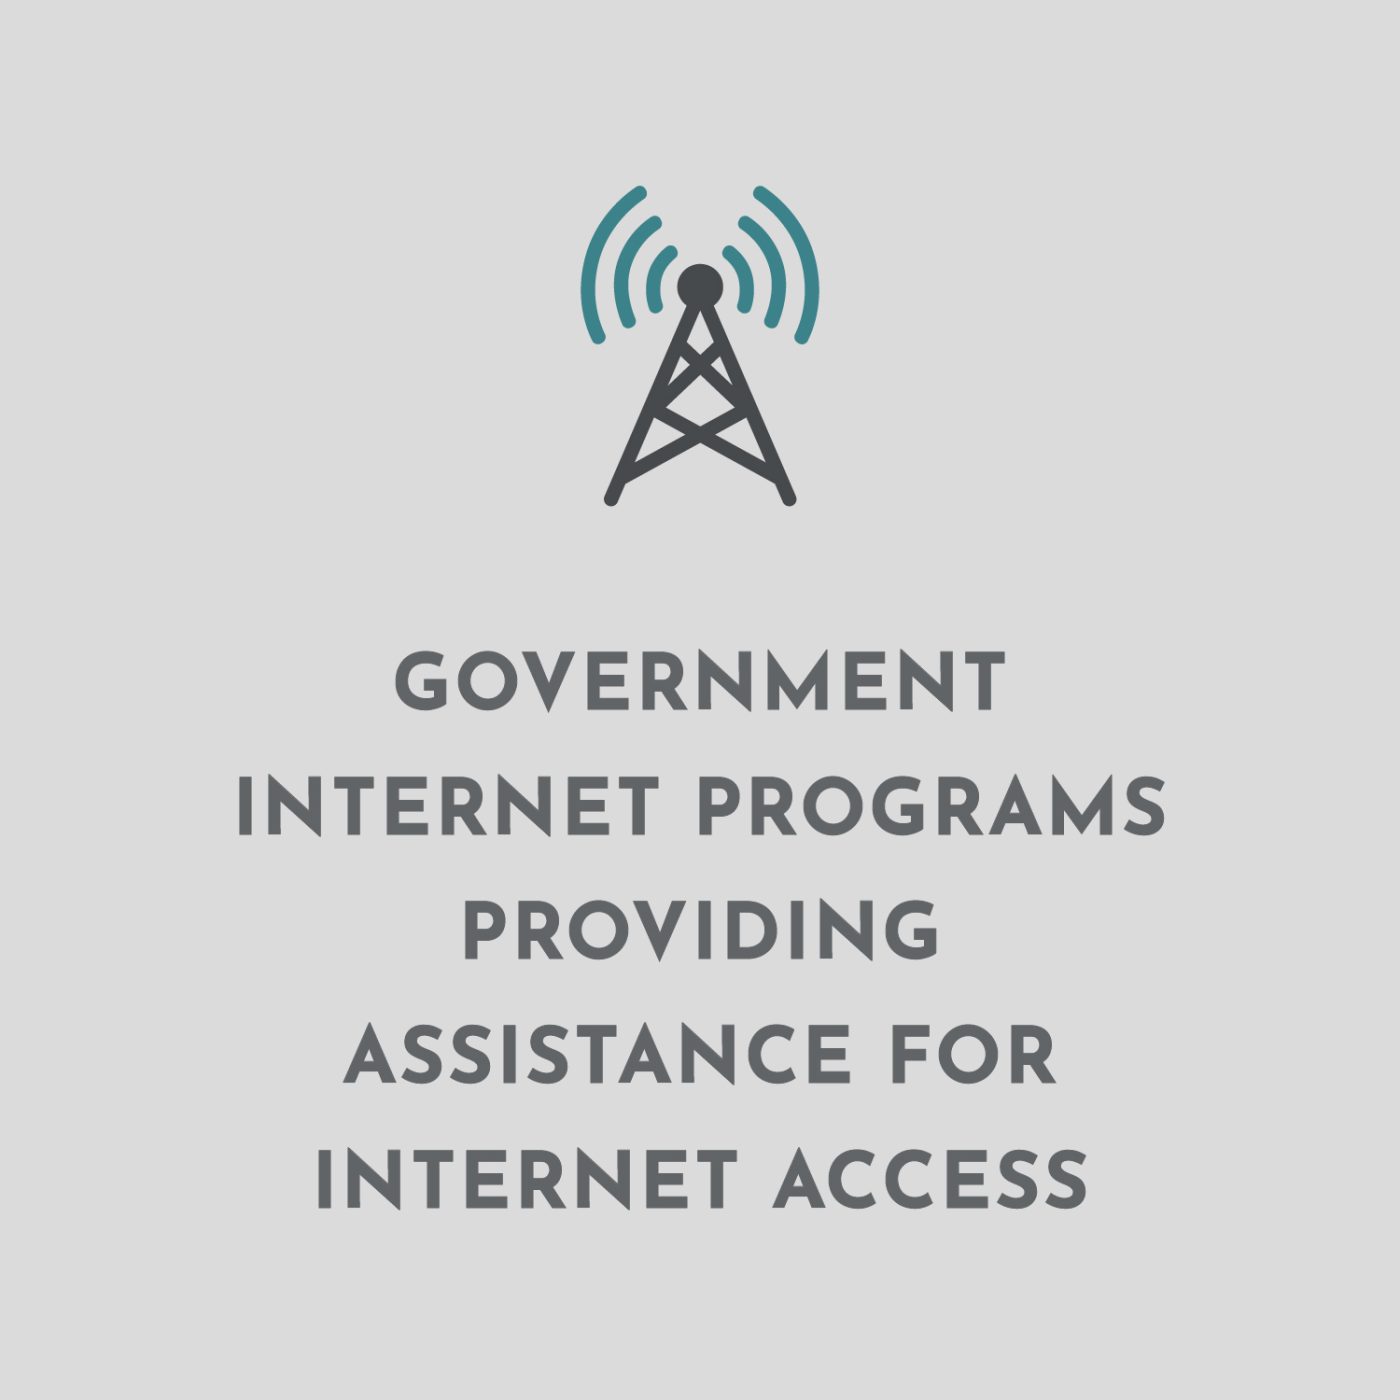 Infographic that shows an internet tower icon on top of the text "Government internet programs providing assistance for internet access"